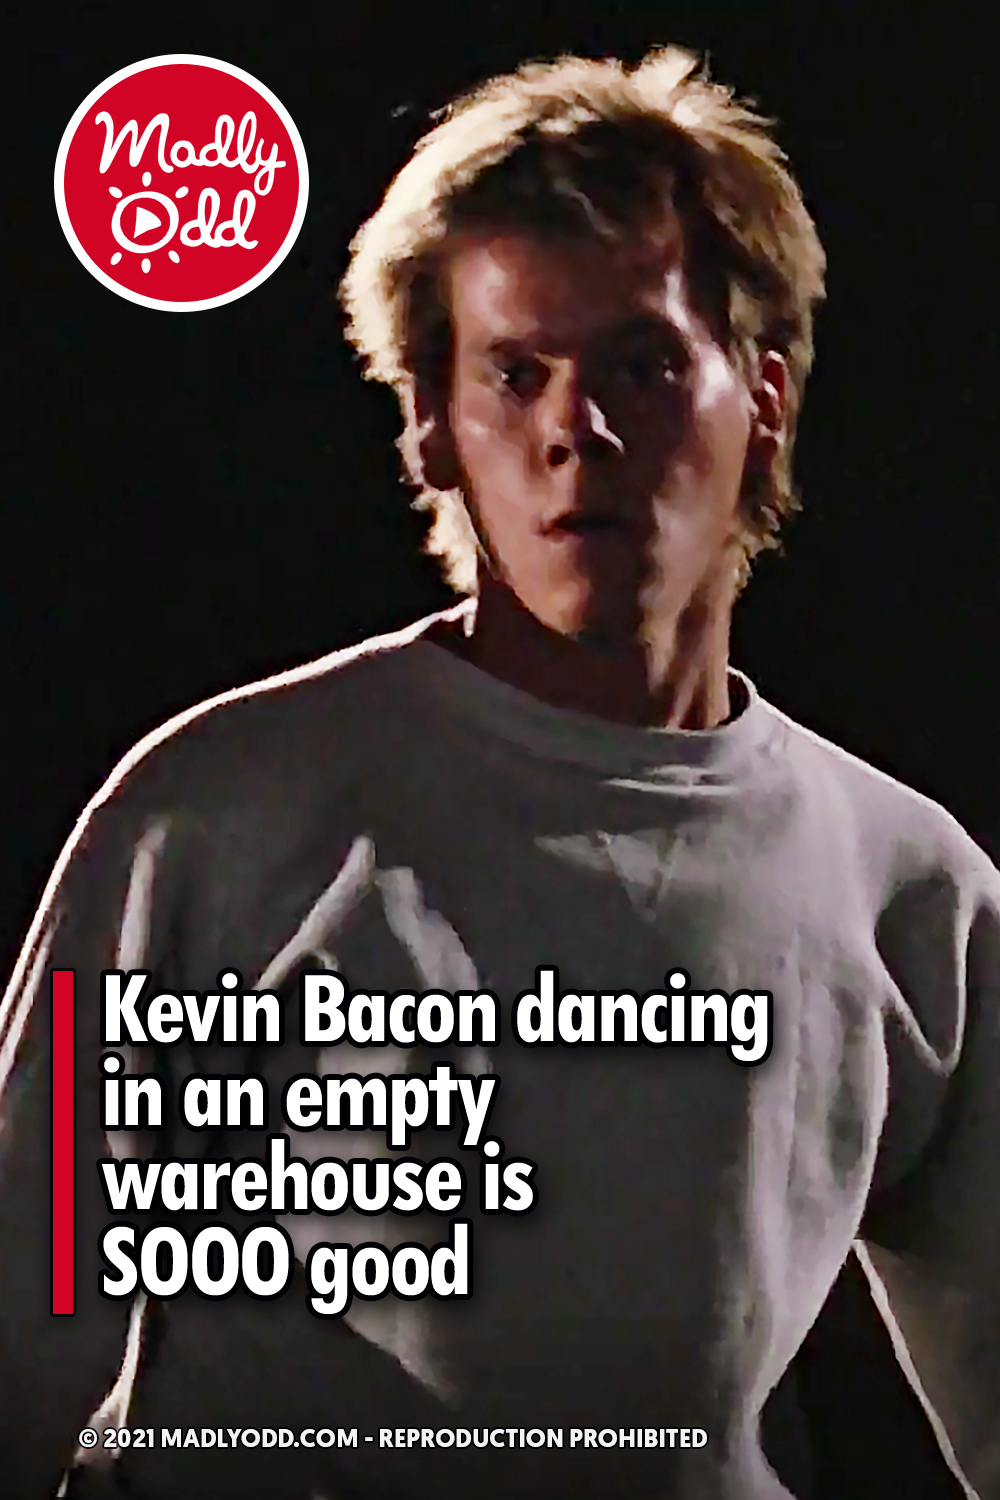 Kevin Bacon dancing in an empty warehouse is SOOO good